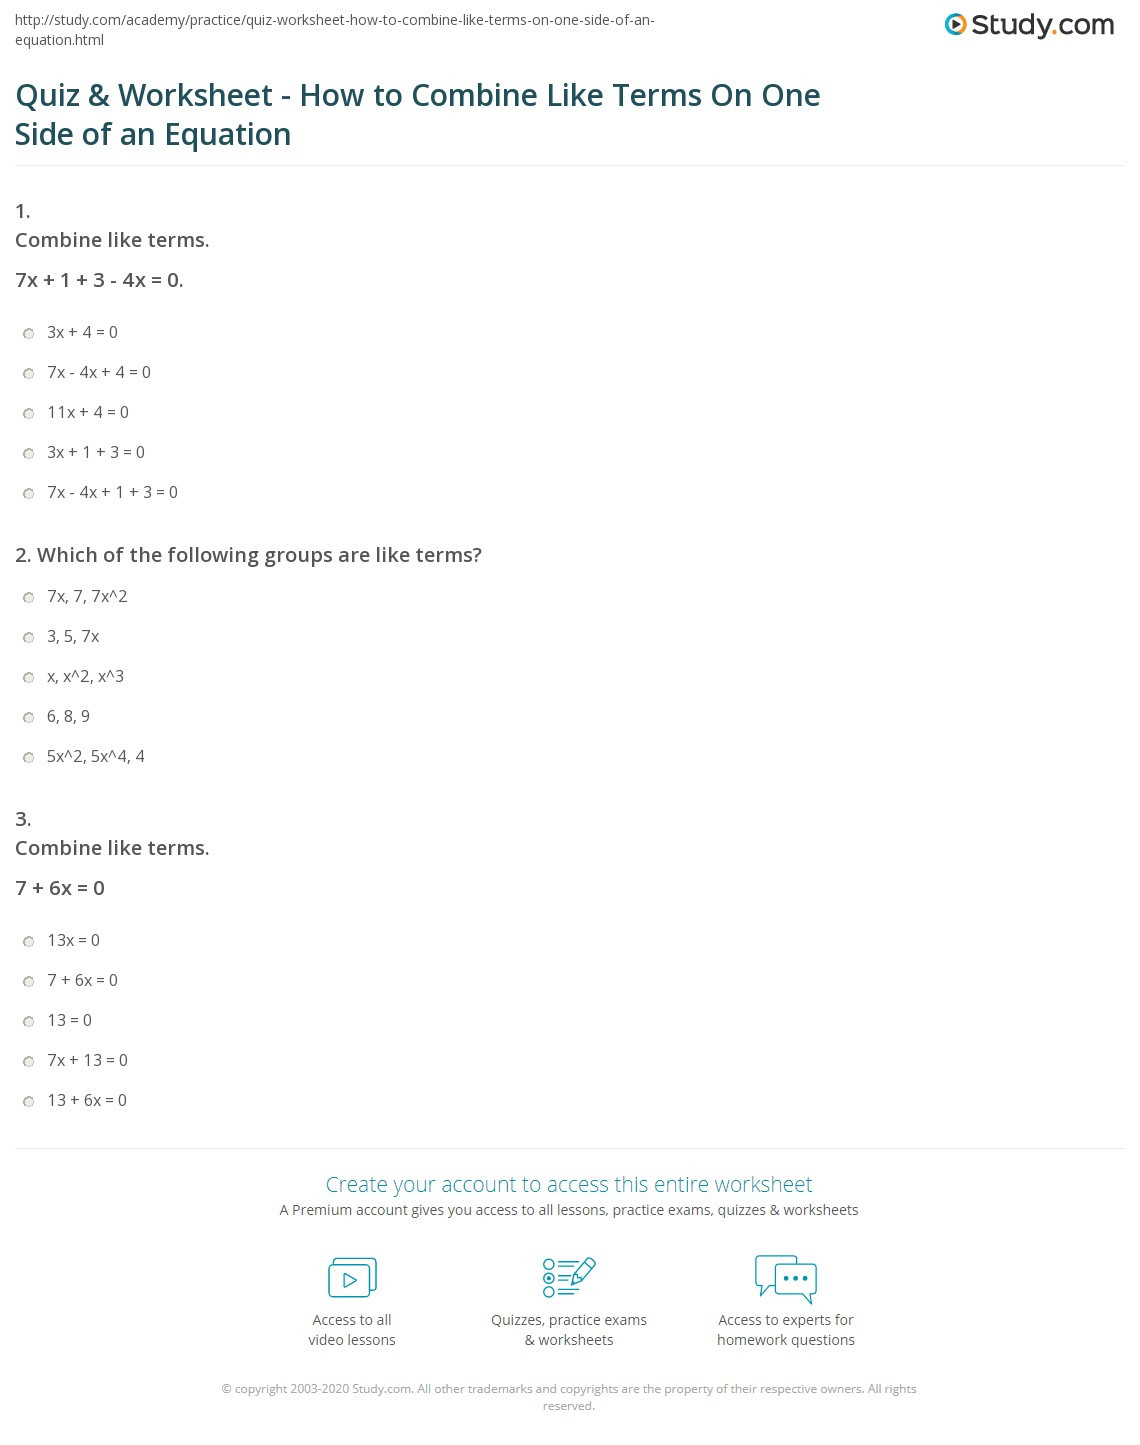 Combining Like Terms Equations Worksheet Quiz &amp; Worksheet How to Bine Like Terms E Side Of